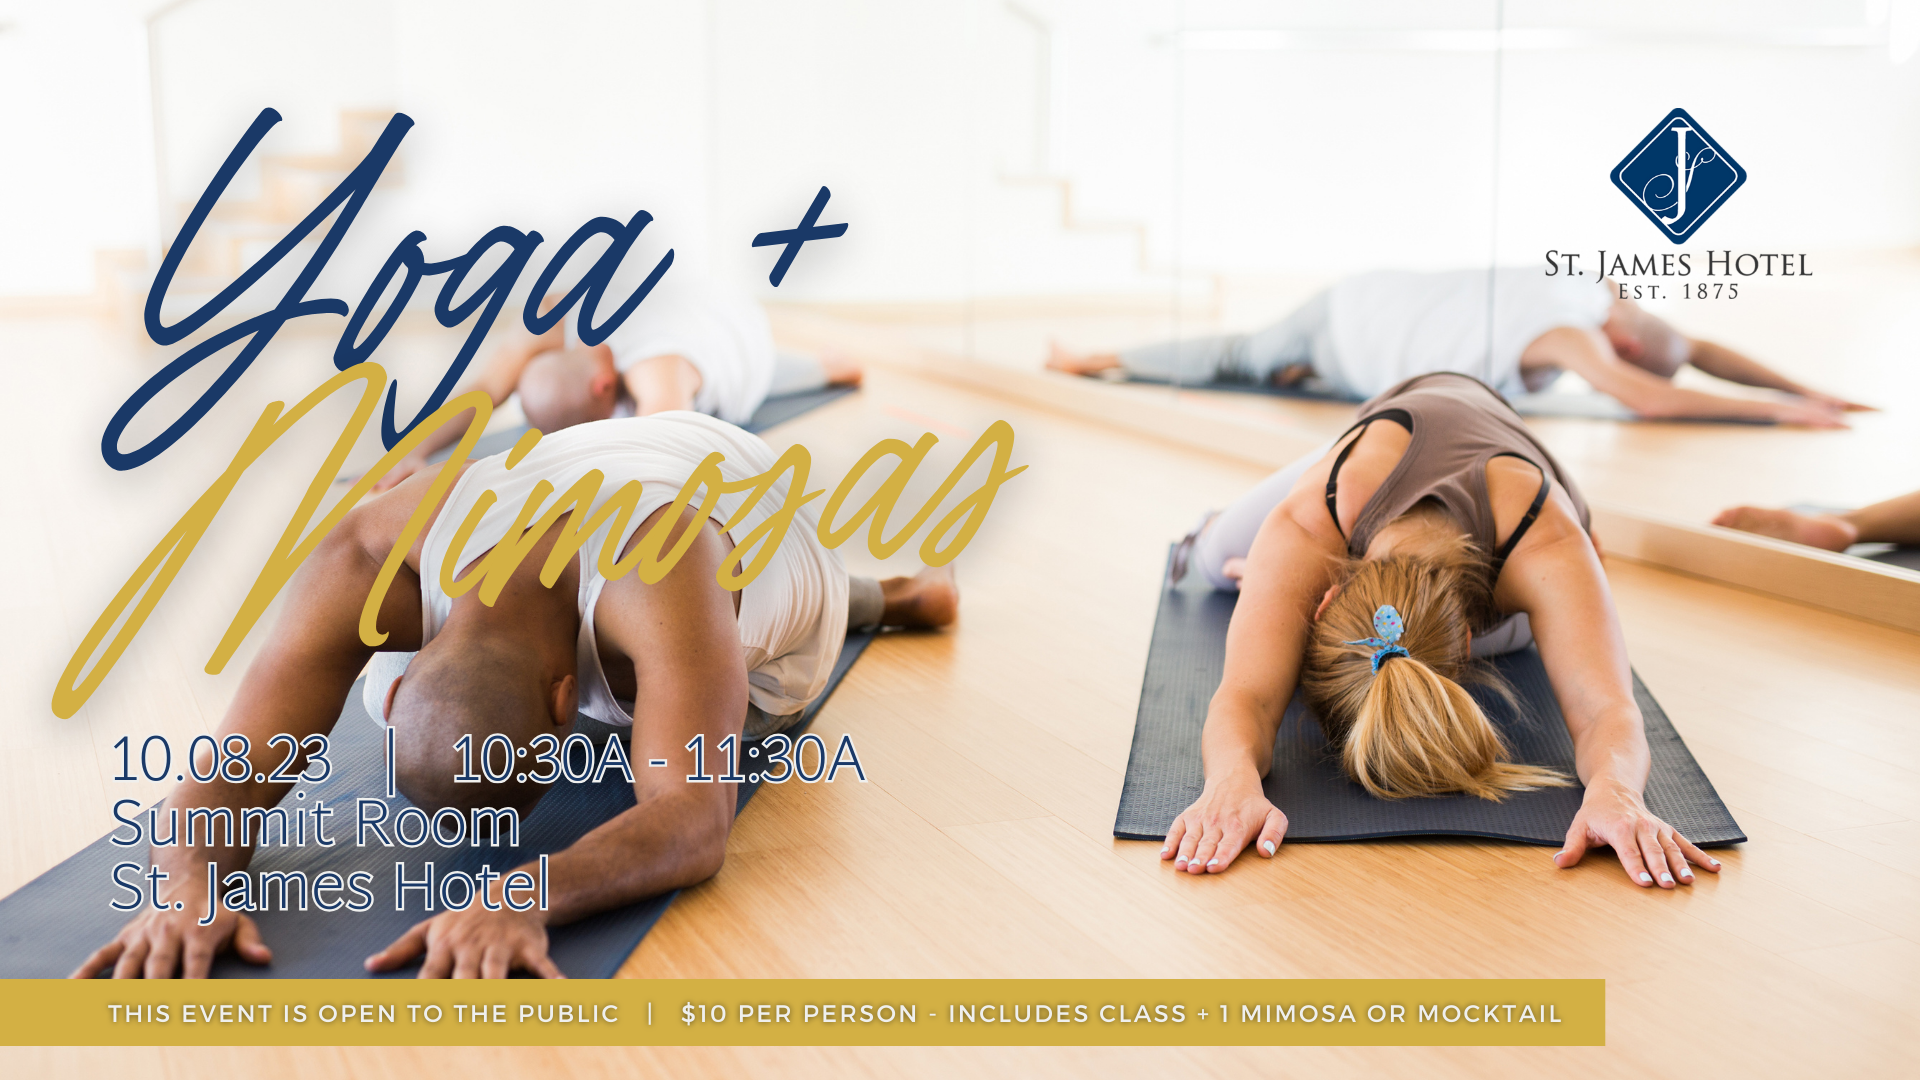 Join us for yoga + mimosas in the Summit Room at the St. James Hotel